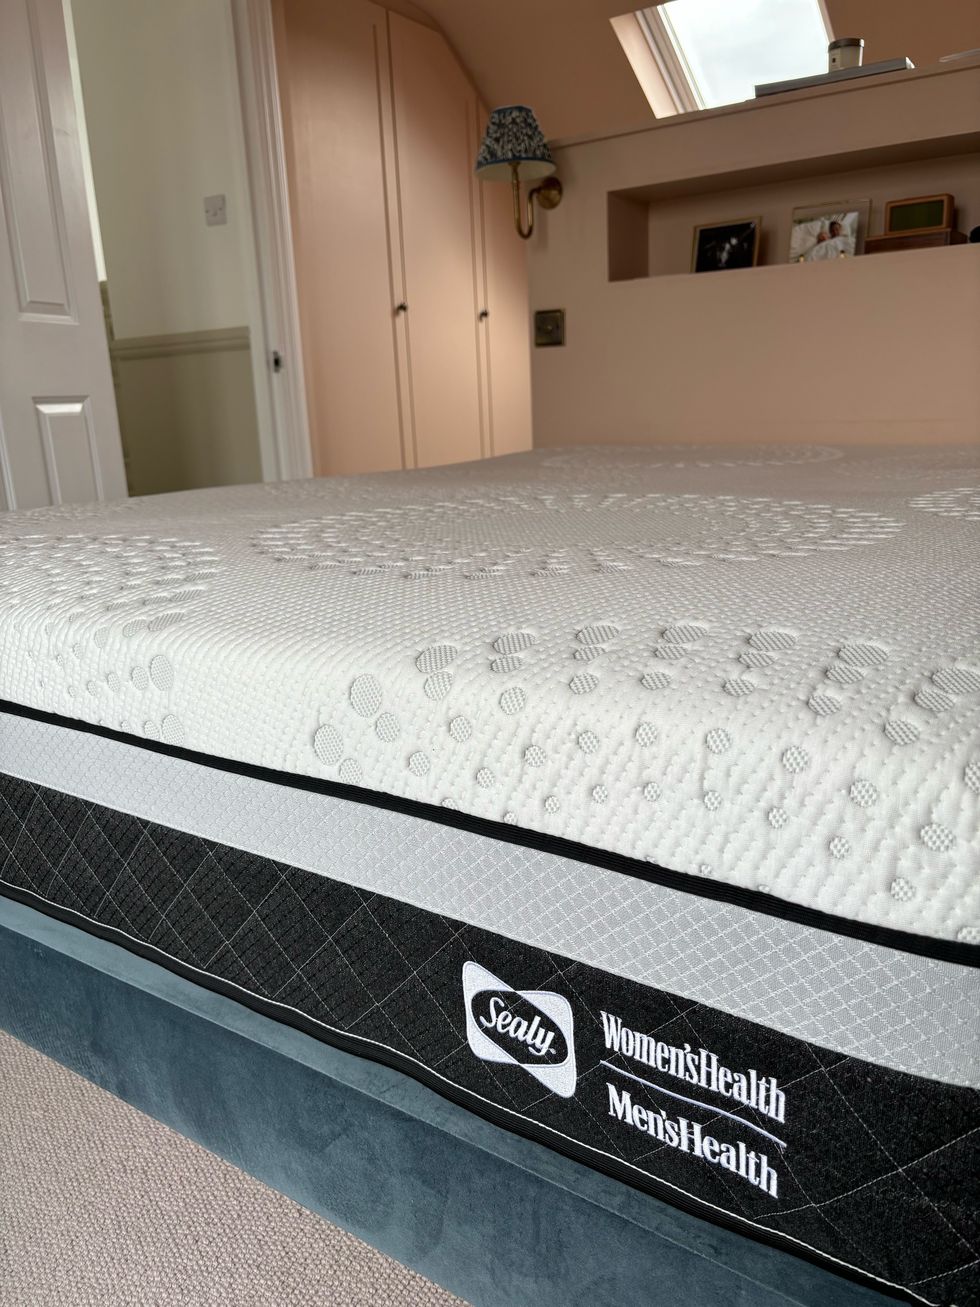 sealy men's and women's health recharge mattress review